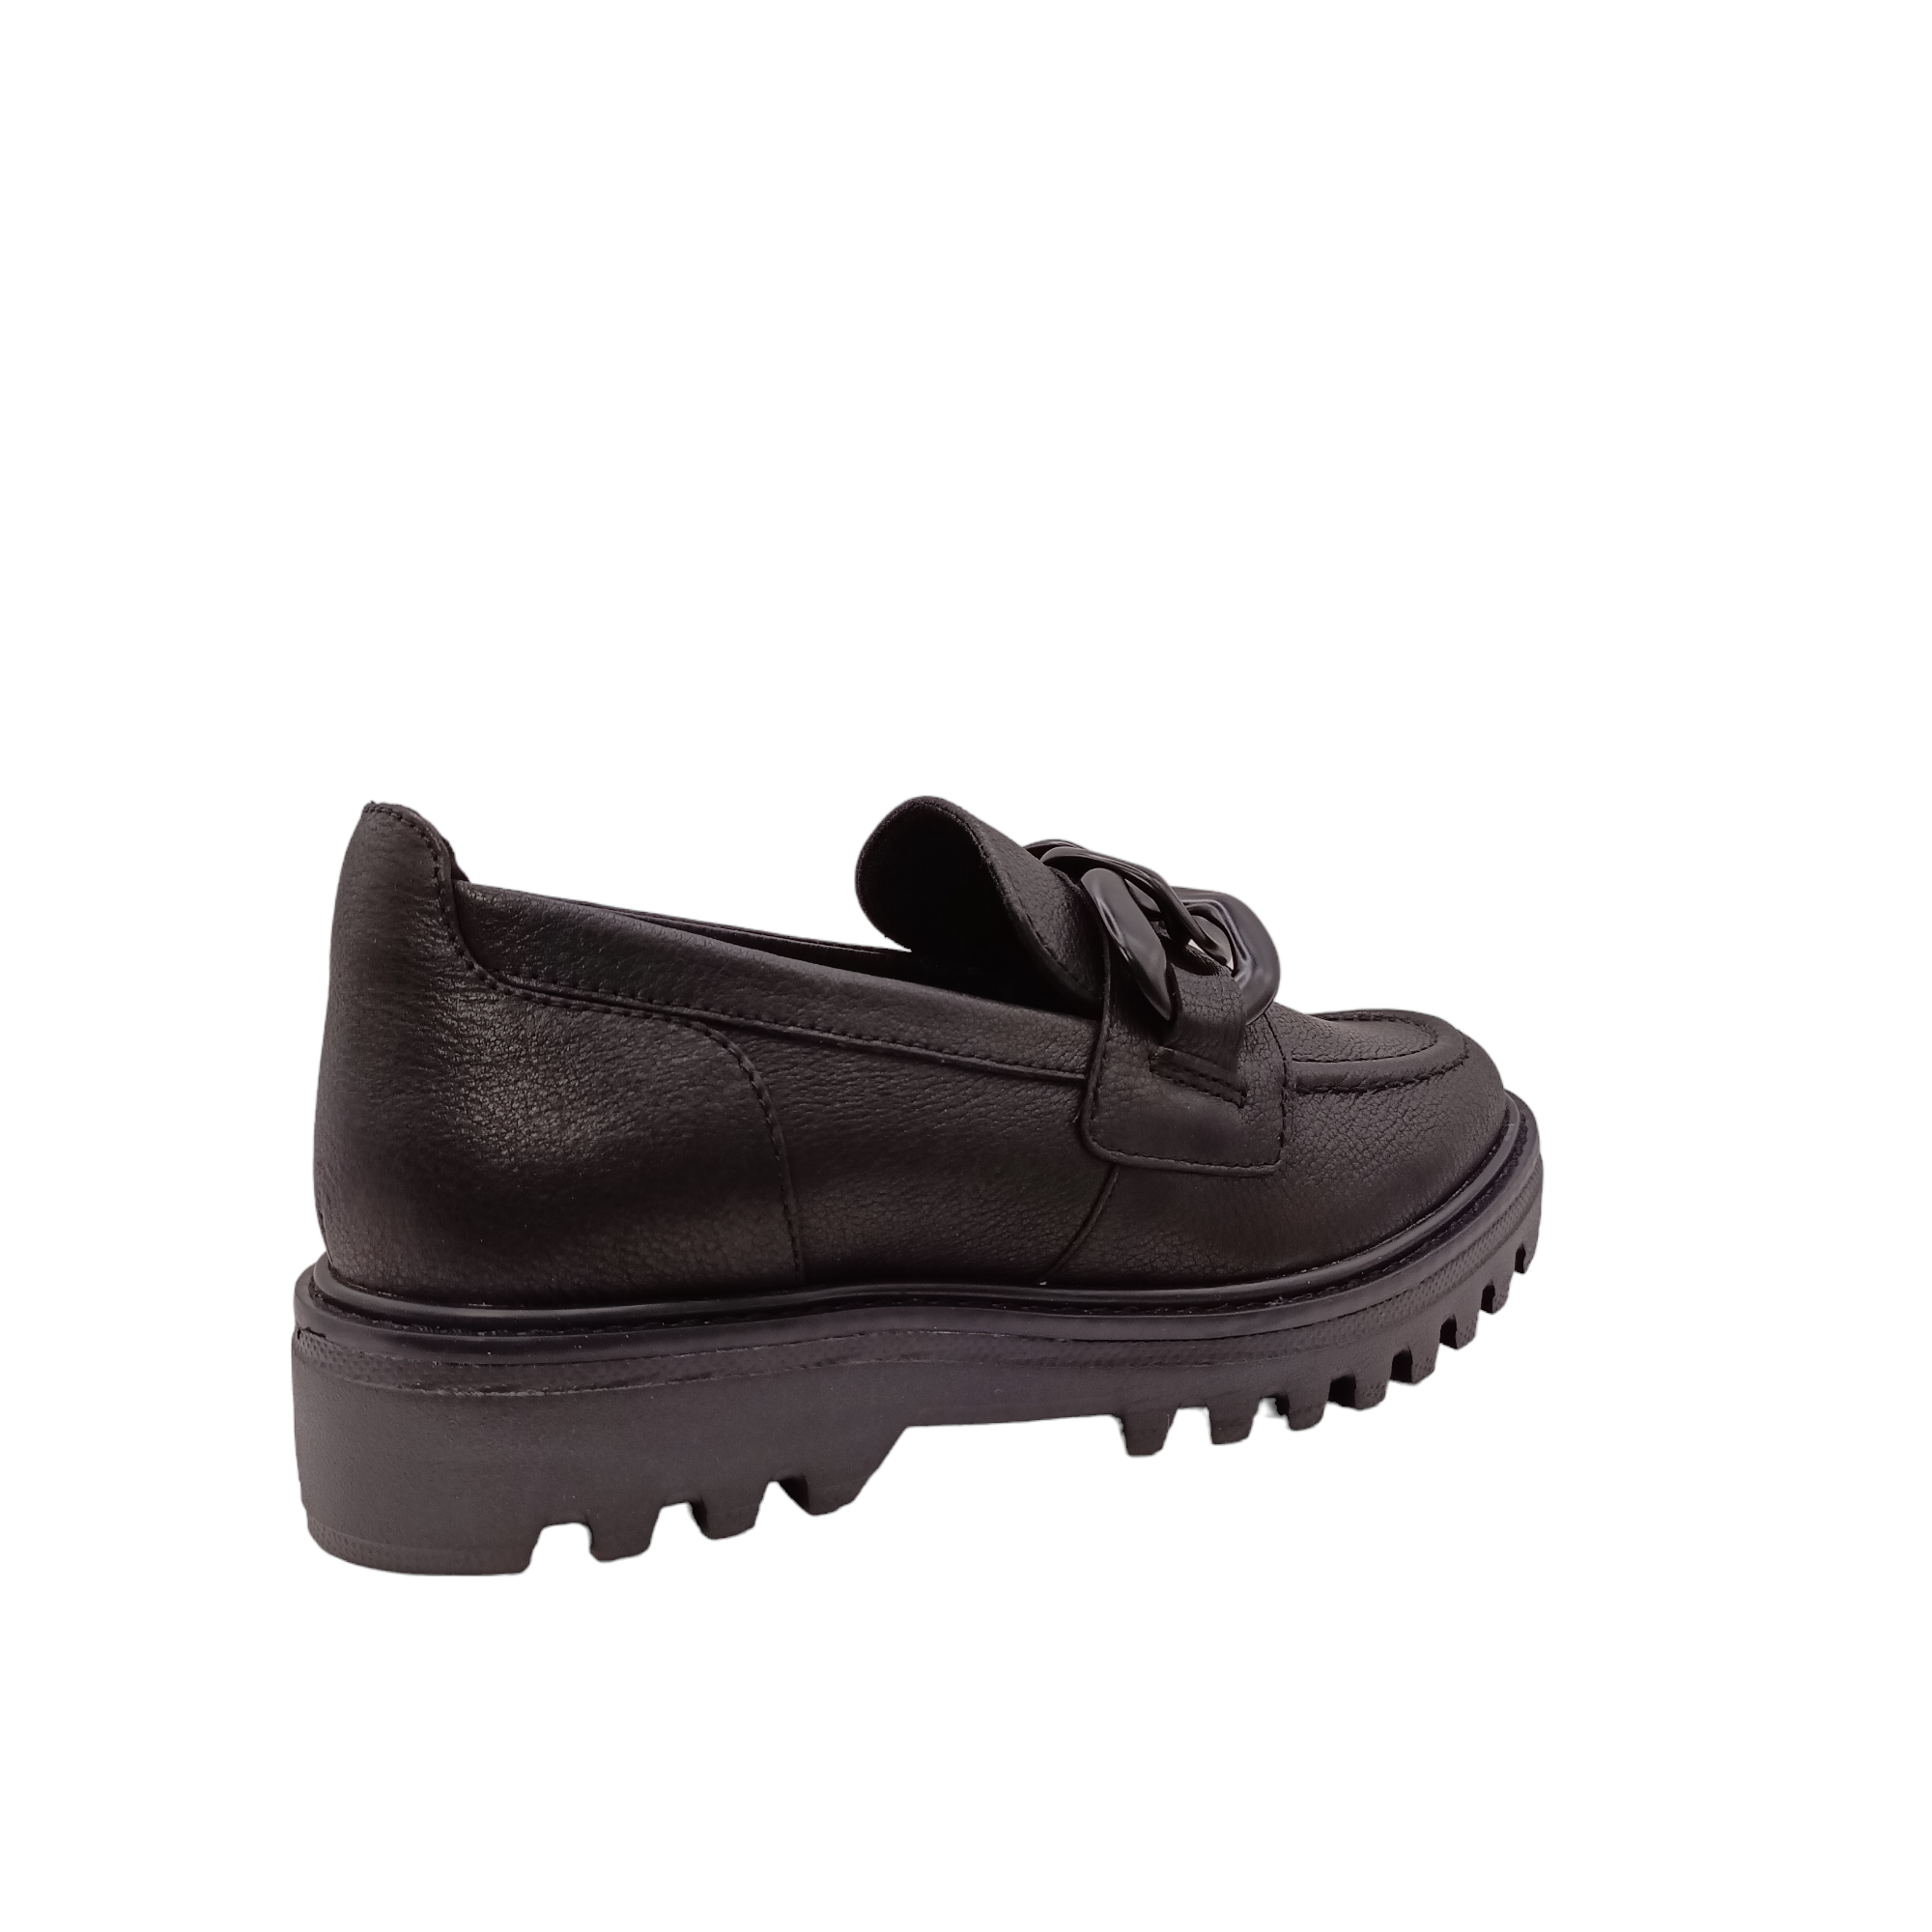 Shop Brooklyn Hush Puppies - with shoe&me - from Hush Puppies - Shoes - Shoe, Winter, Womens - [collection]